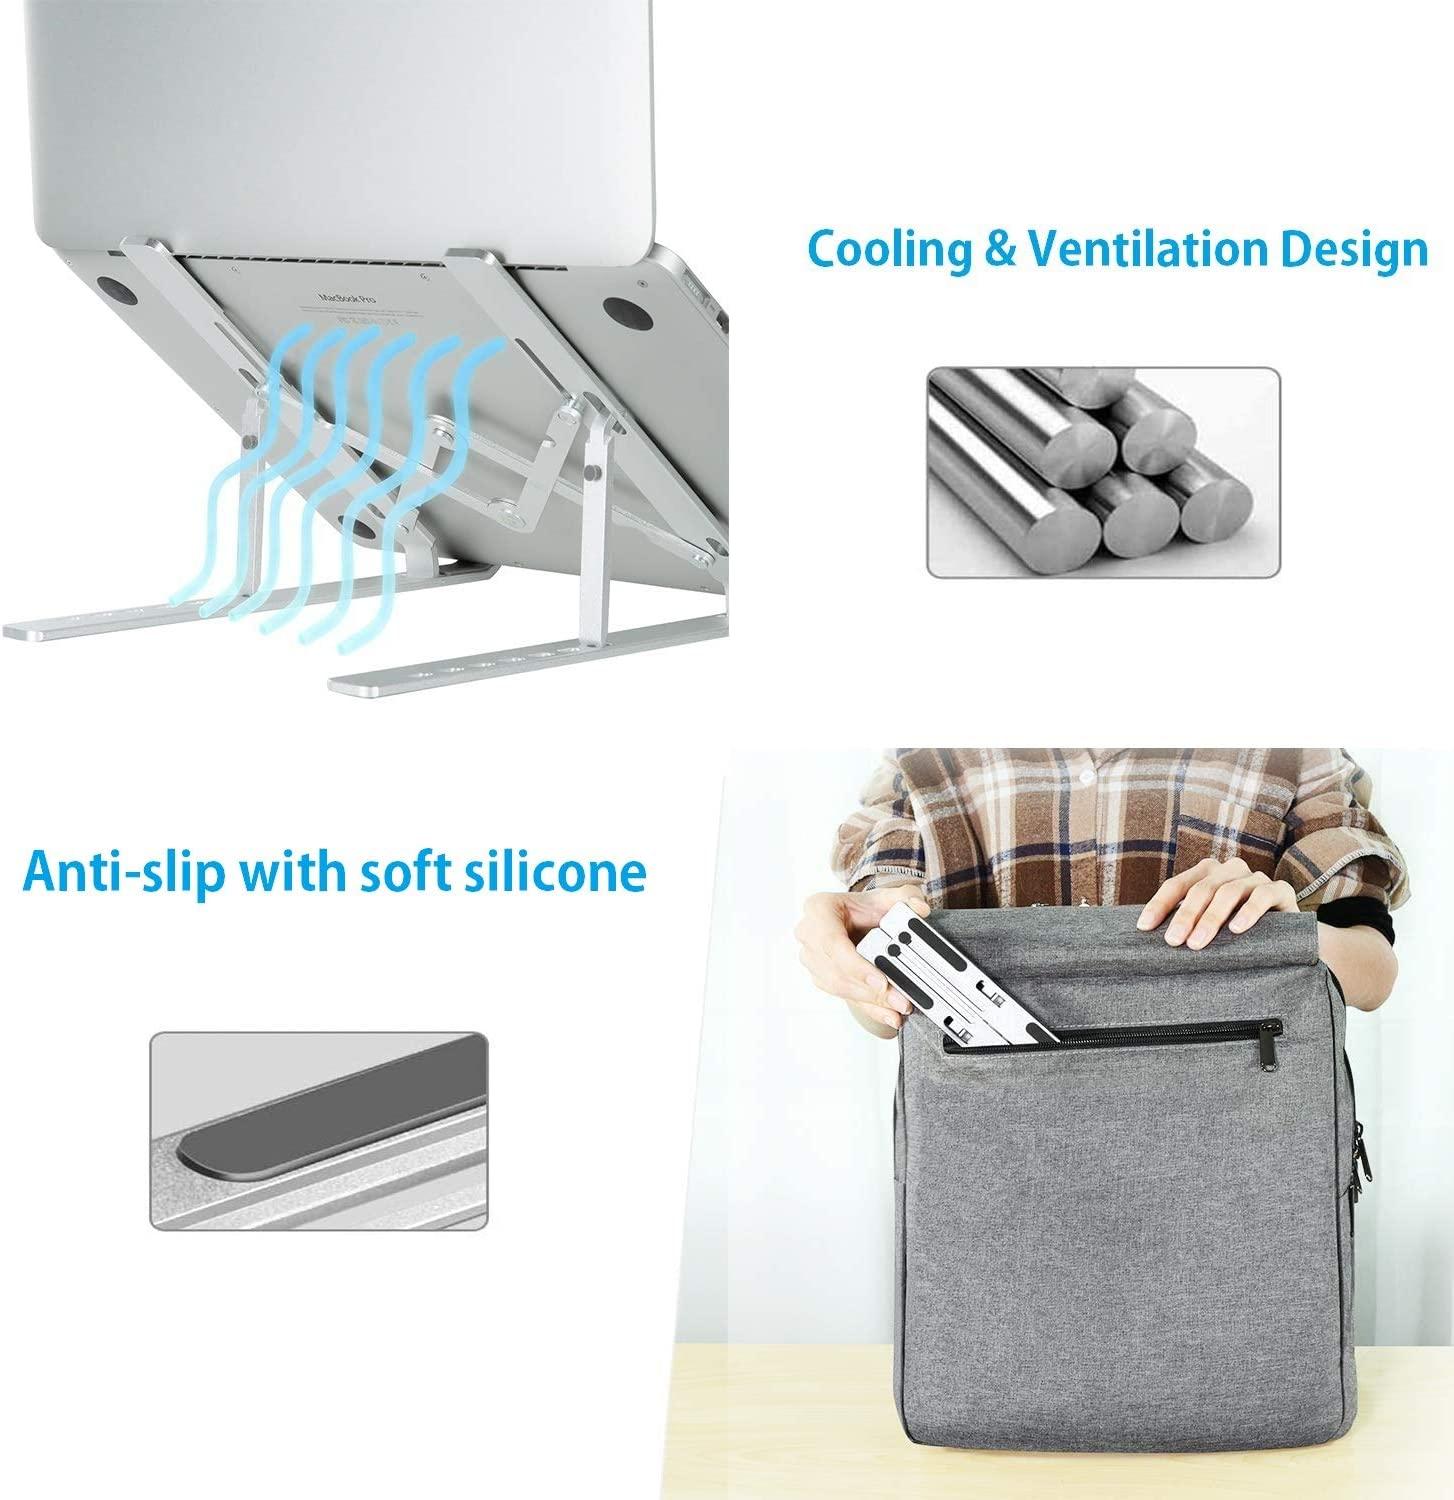 Portable Folding Laptop Stand Adjustable Support Base Notebook Stand Holder For Macbook Pro Air Lapdesk Computer Cooling Bracket